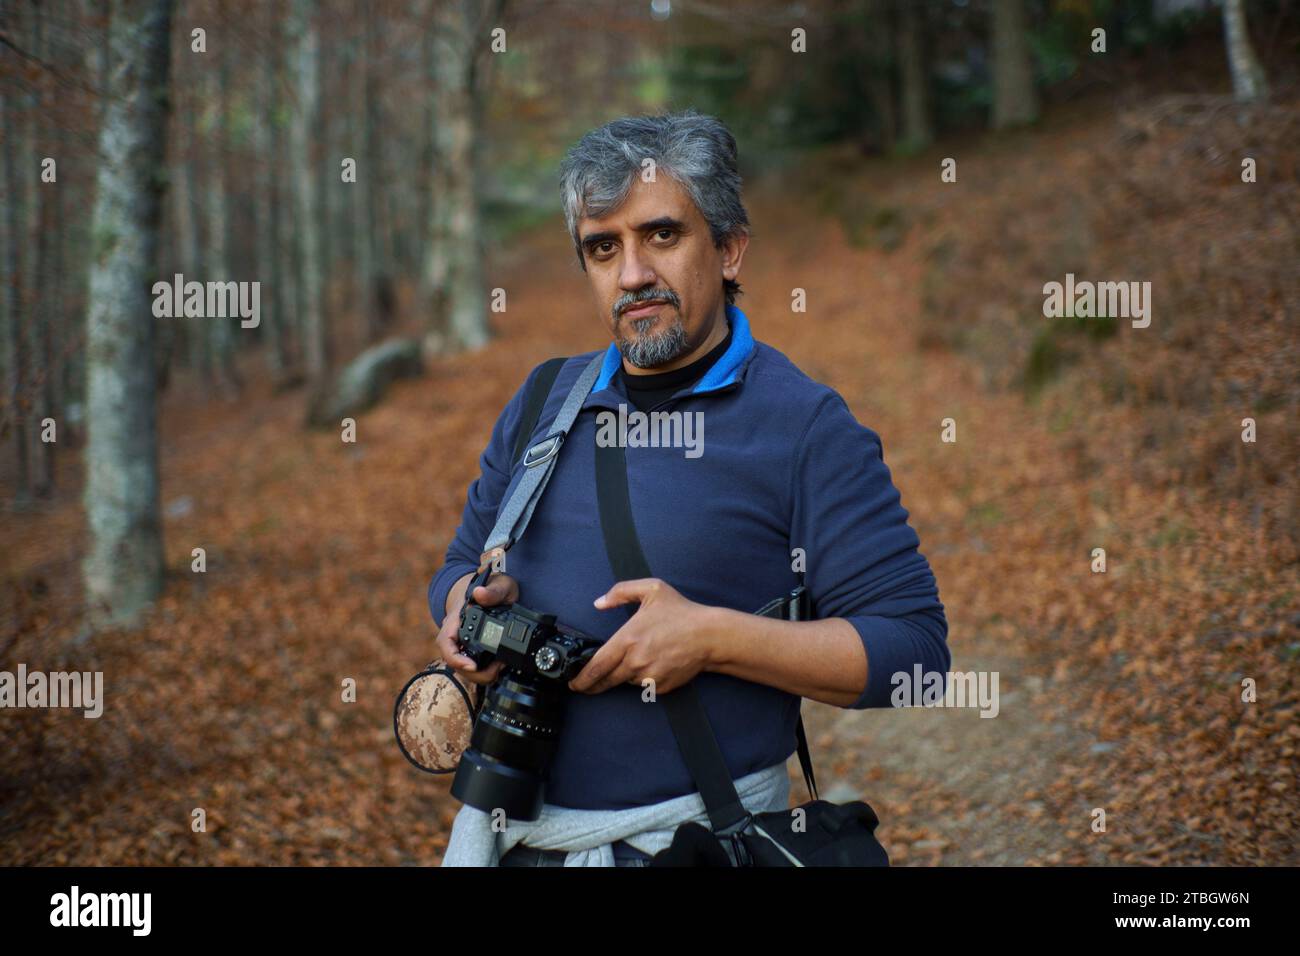 Narrow depth of field portrait of a middle aged landscape photographer holding at camera while standing in a forest Stock Photo